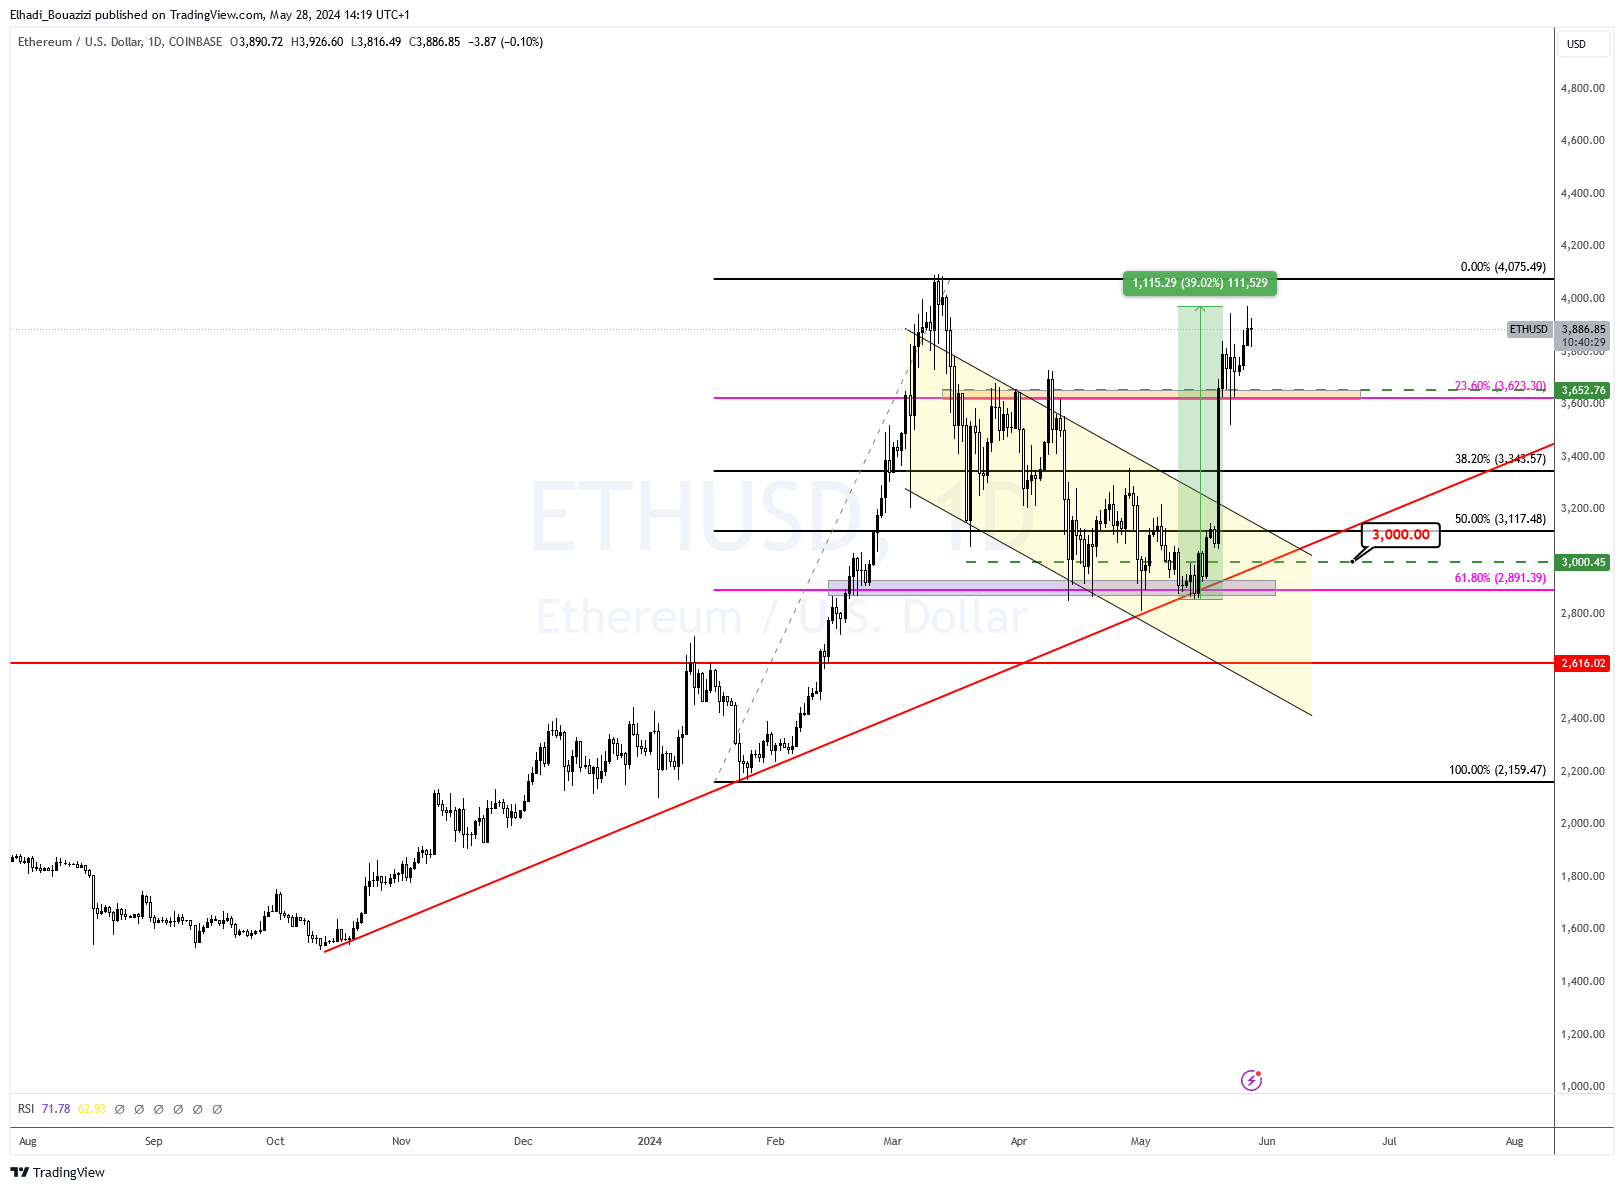 Ethereum (ETH) price technical chart.